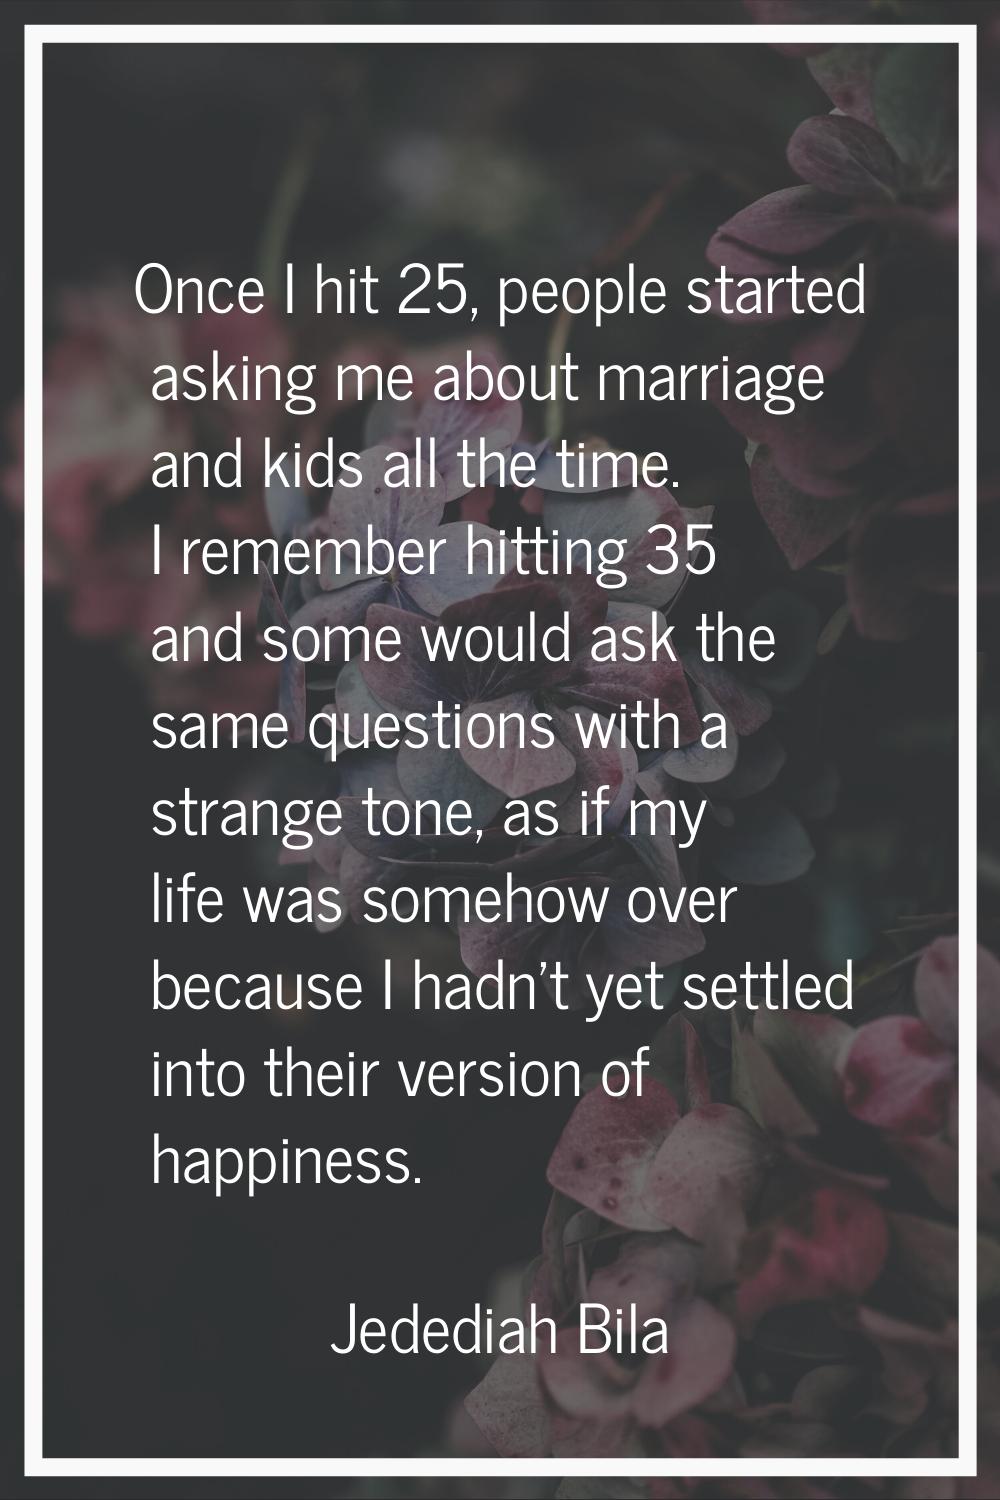 Once I hit 25, people started asking me about marriage and kids all the time. I remember hitting 35